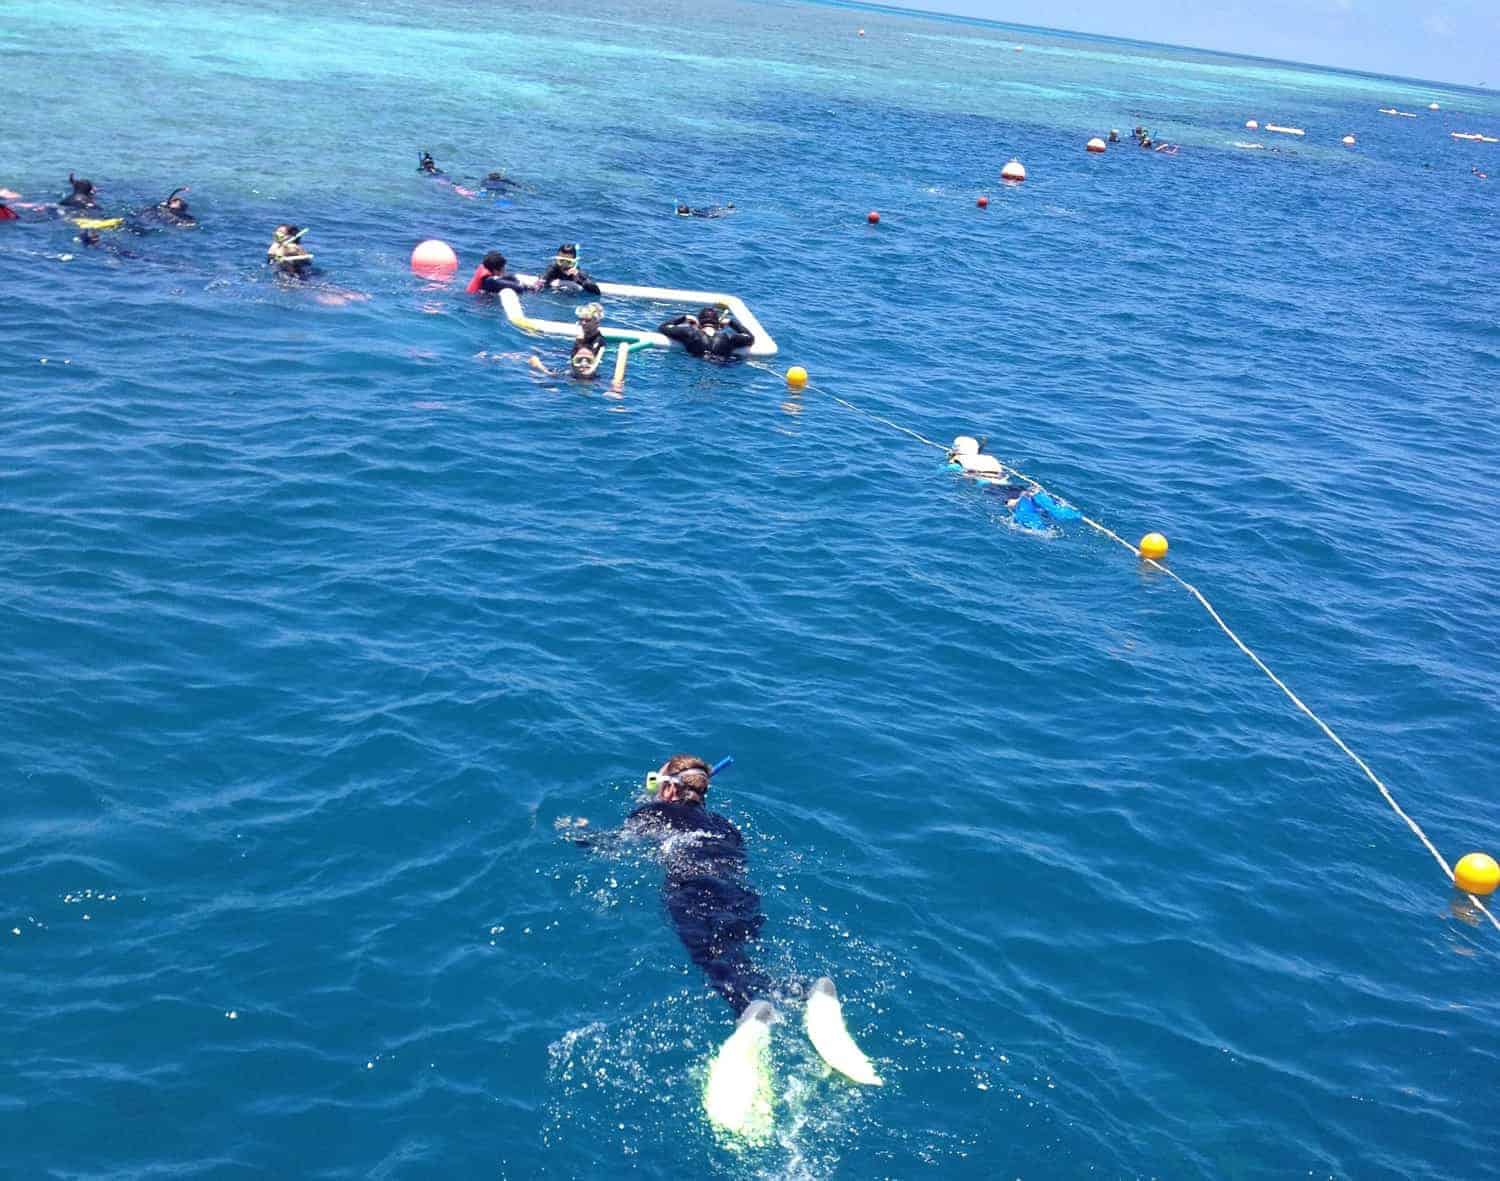 Snorkelling the great barrier reef